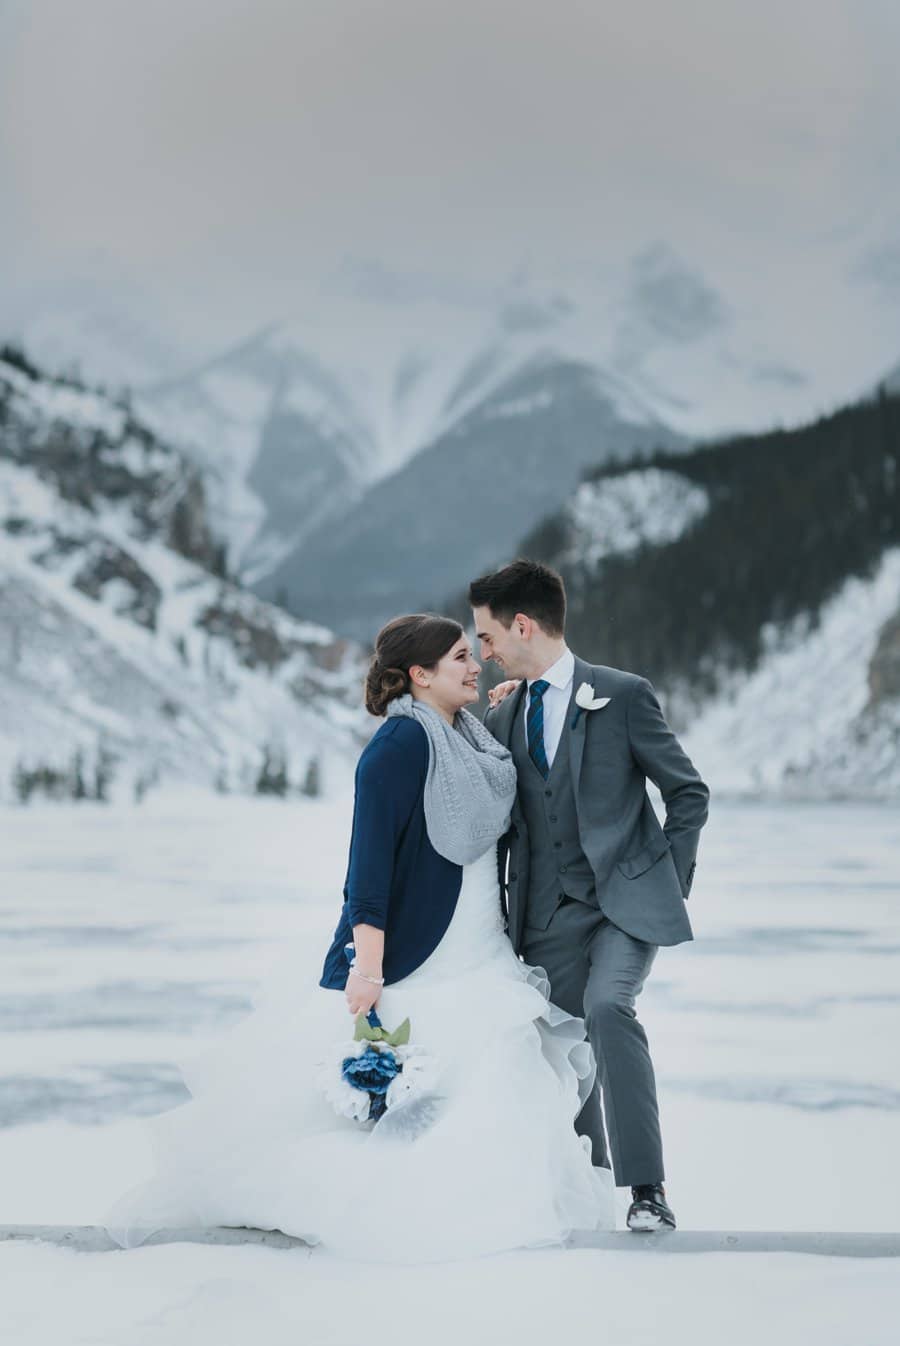 Canmore wedding photographers portraits mountains winter bride groom